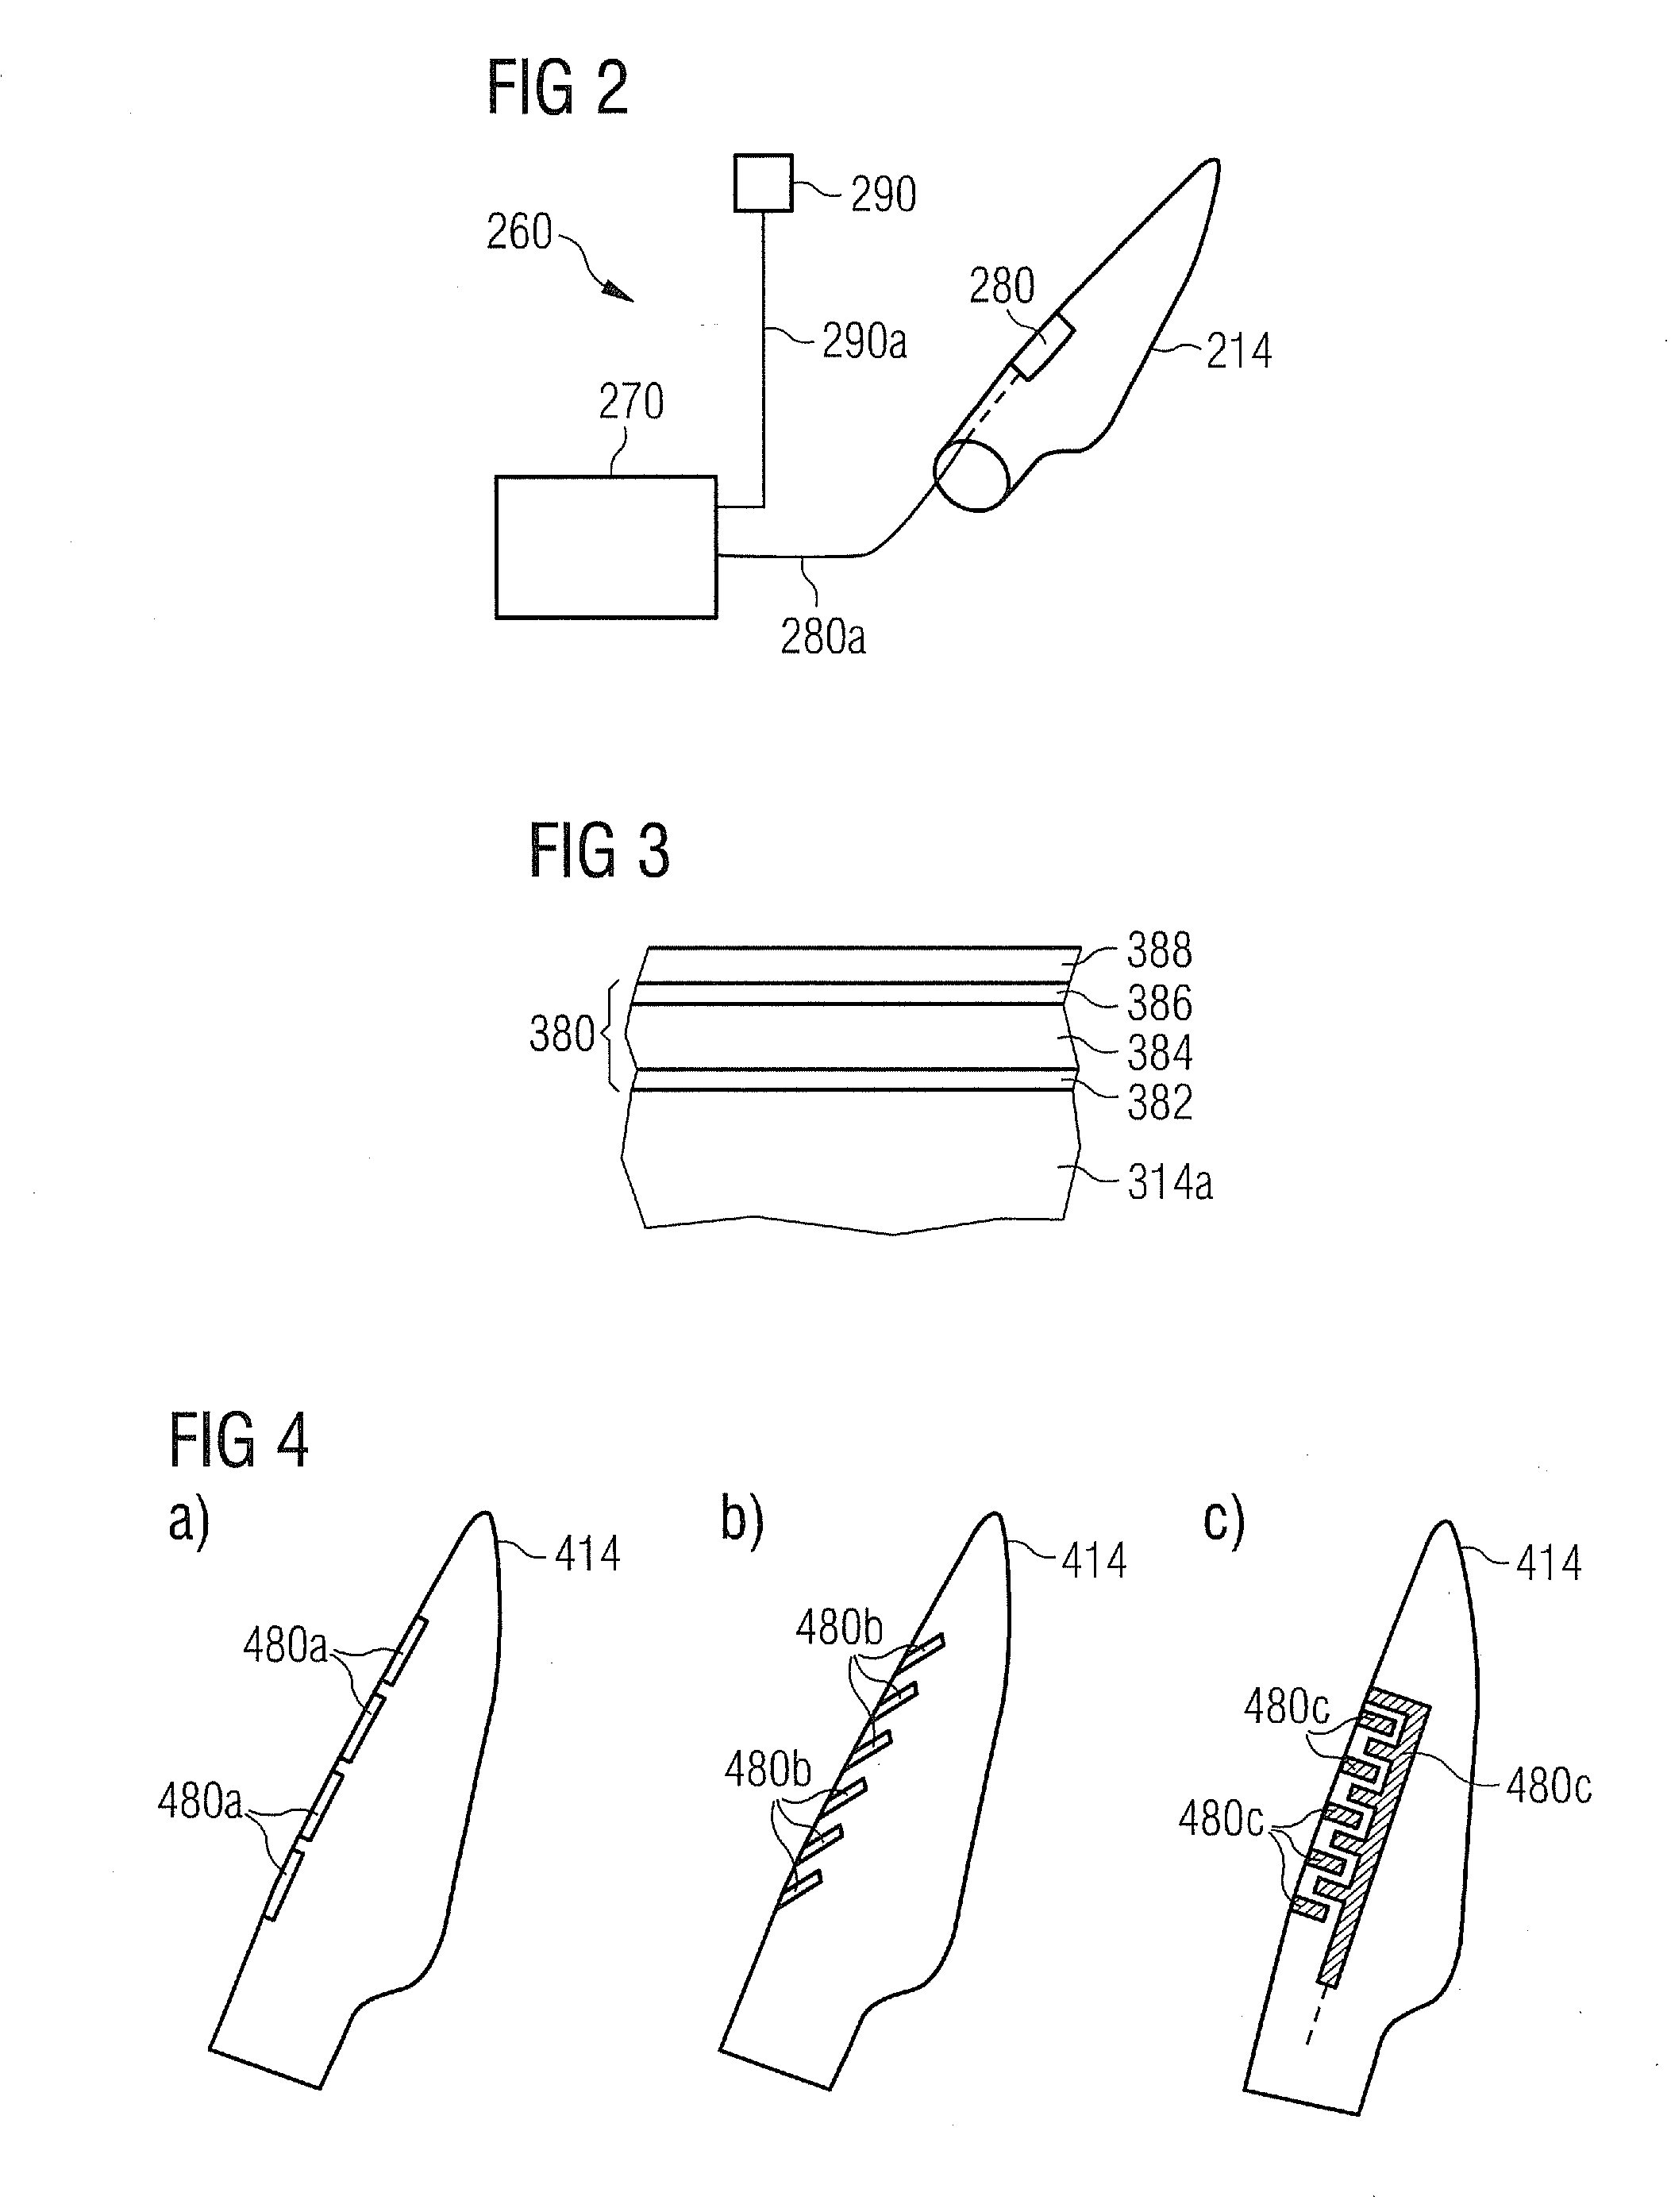 De-icing and/or Anti-icing of a wind turbine component by vibrating a piezoelectric material